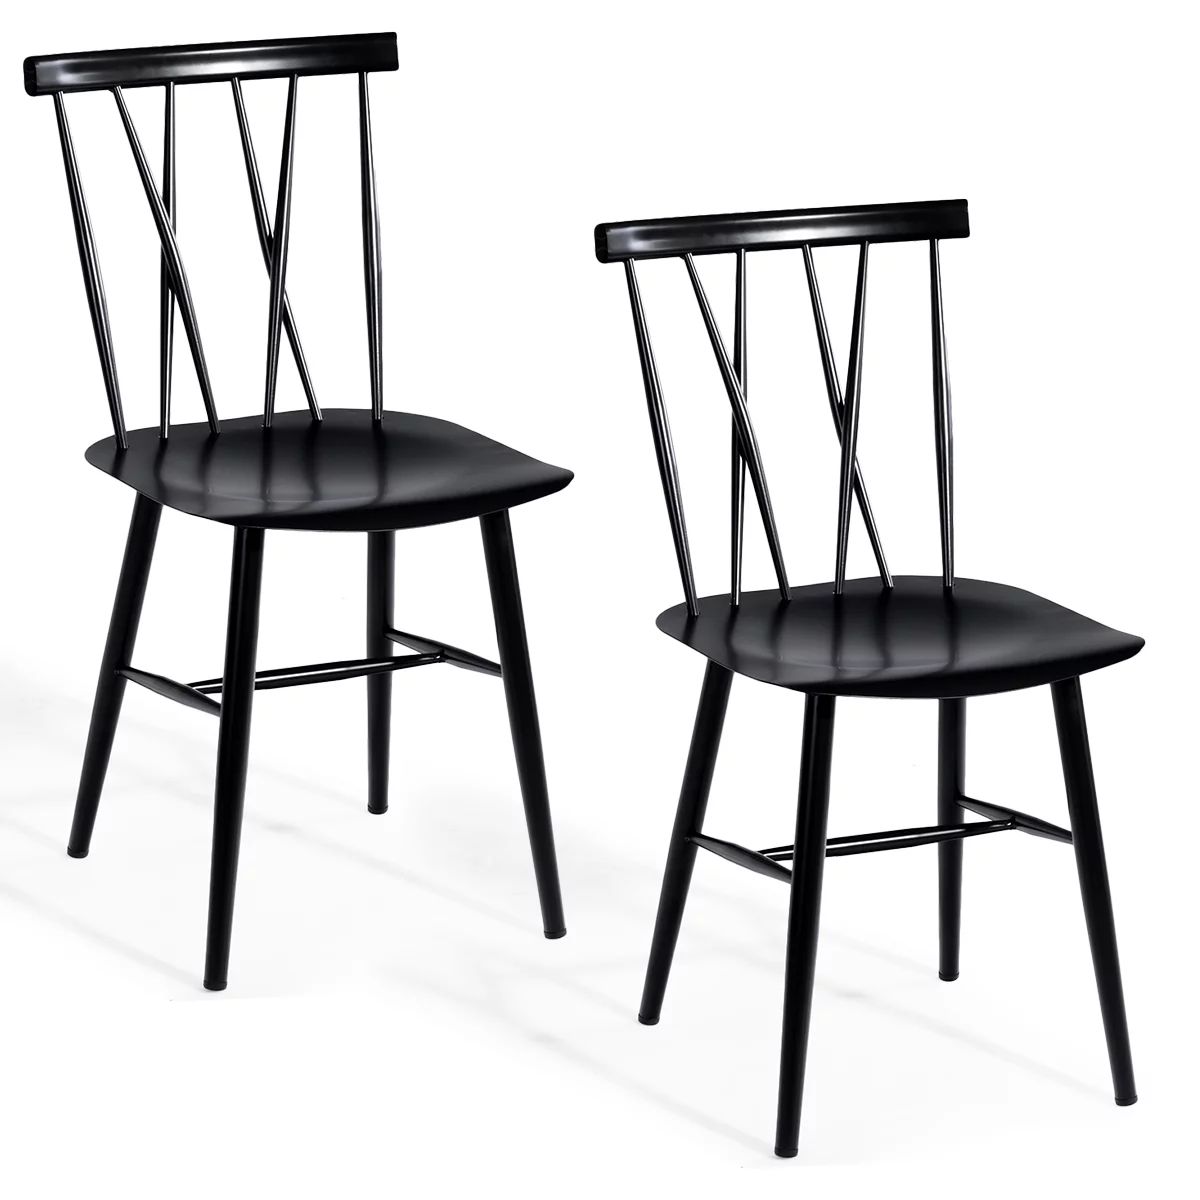 Topbuy 2 PCS Steel Chairs Dining Side Tolix Chairs Armless with High Cross Back Black | Walmart (US)